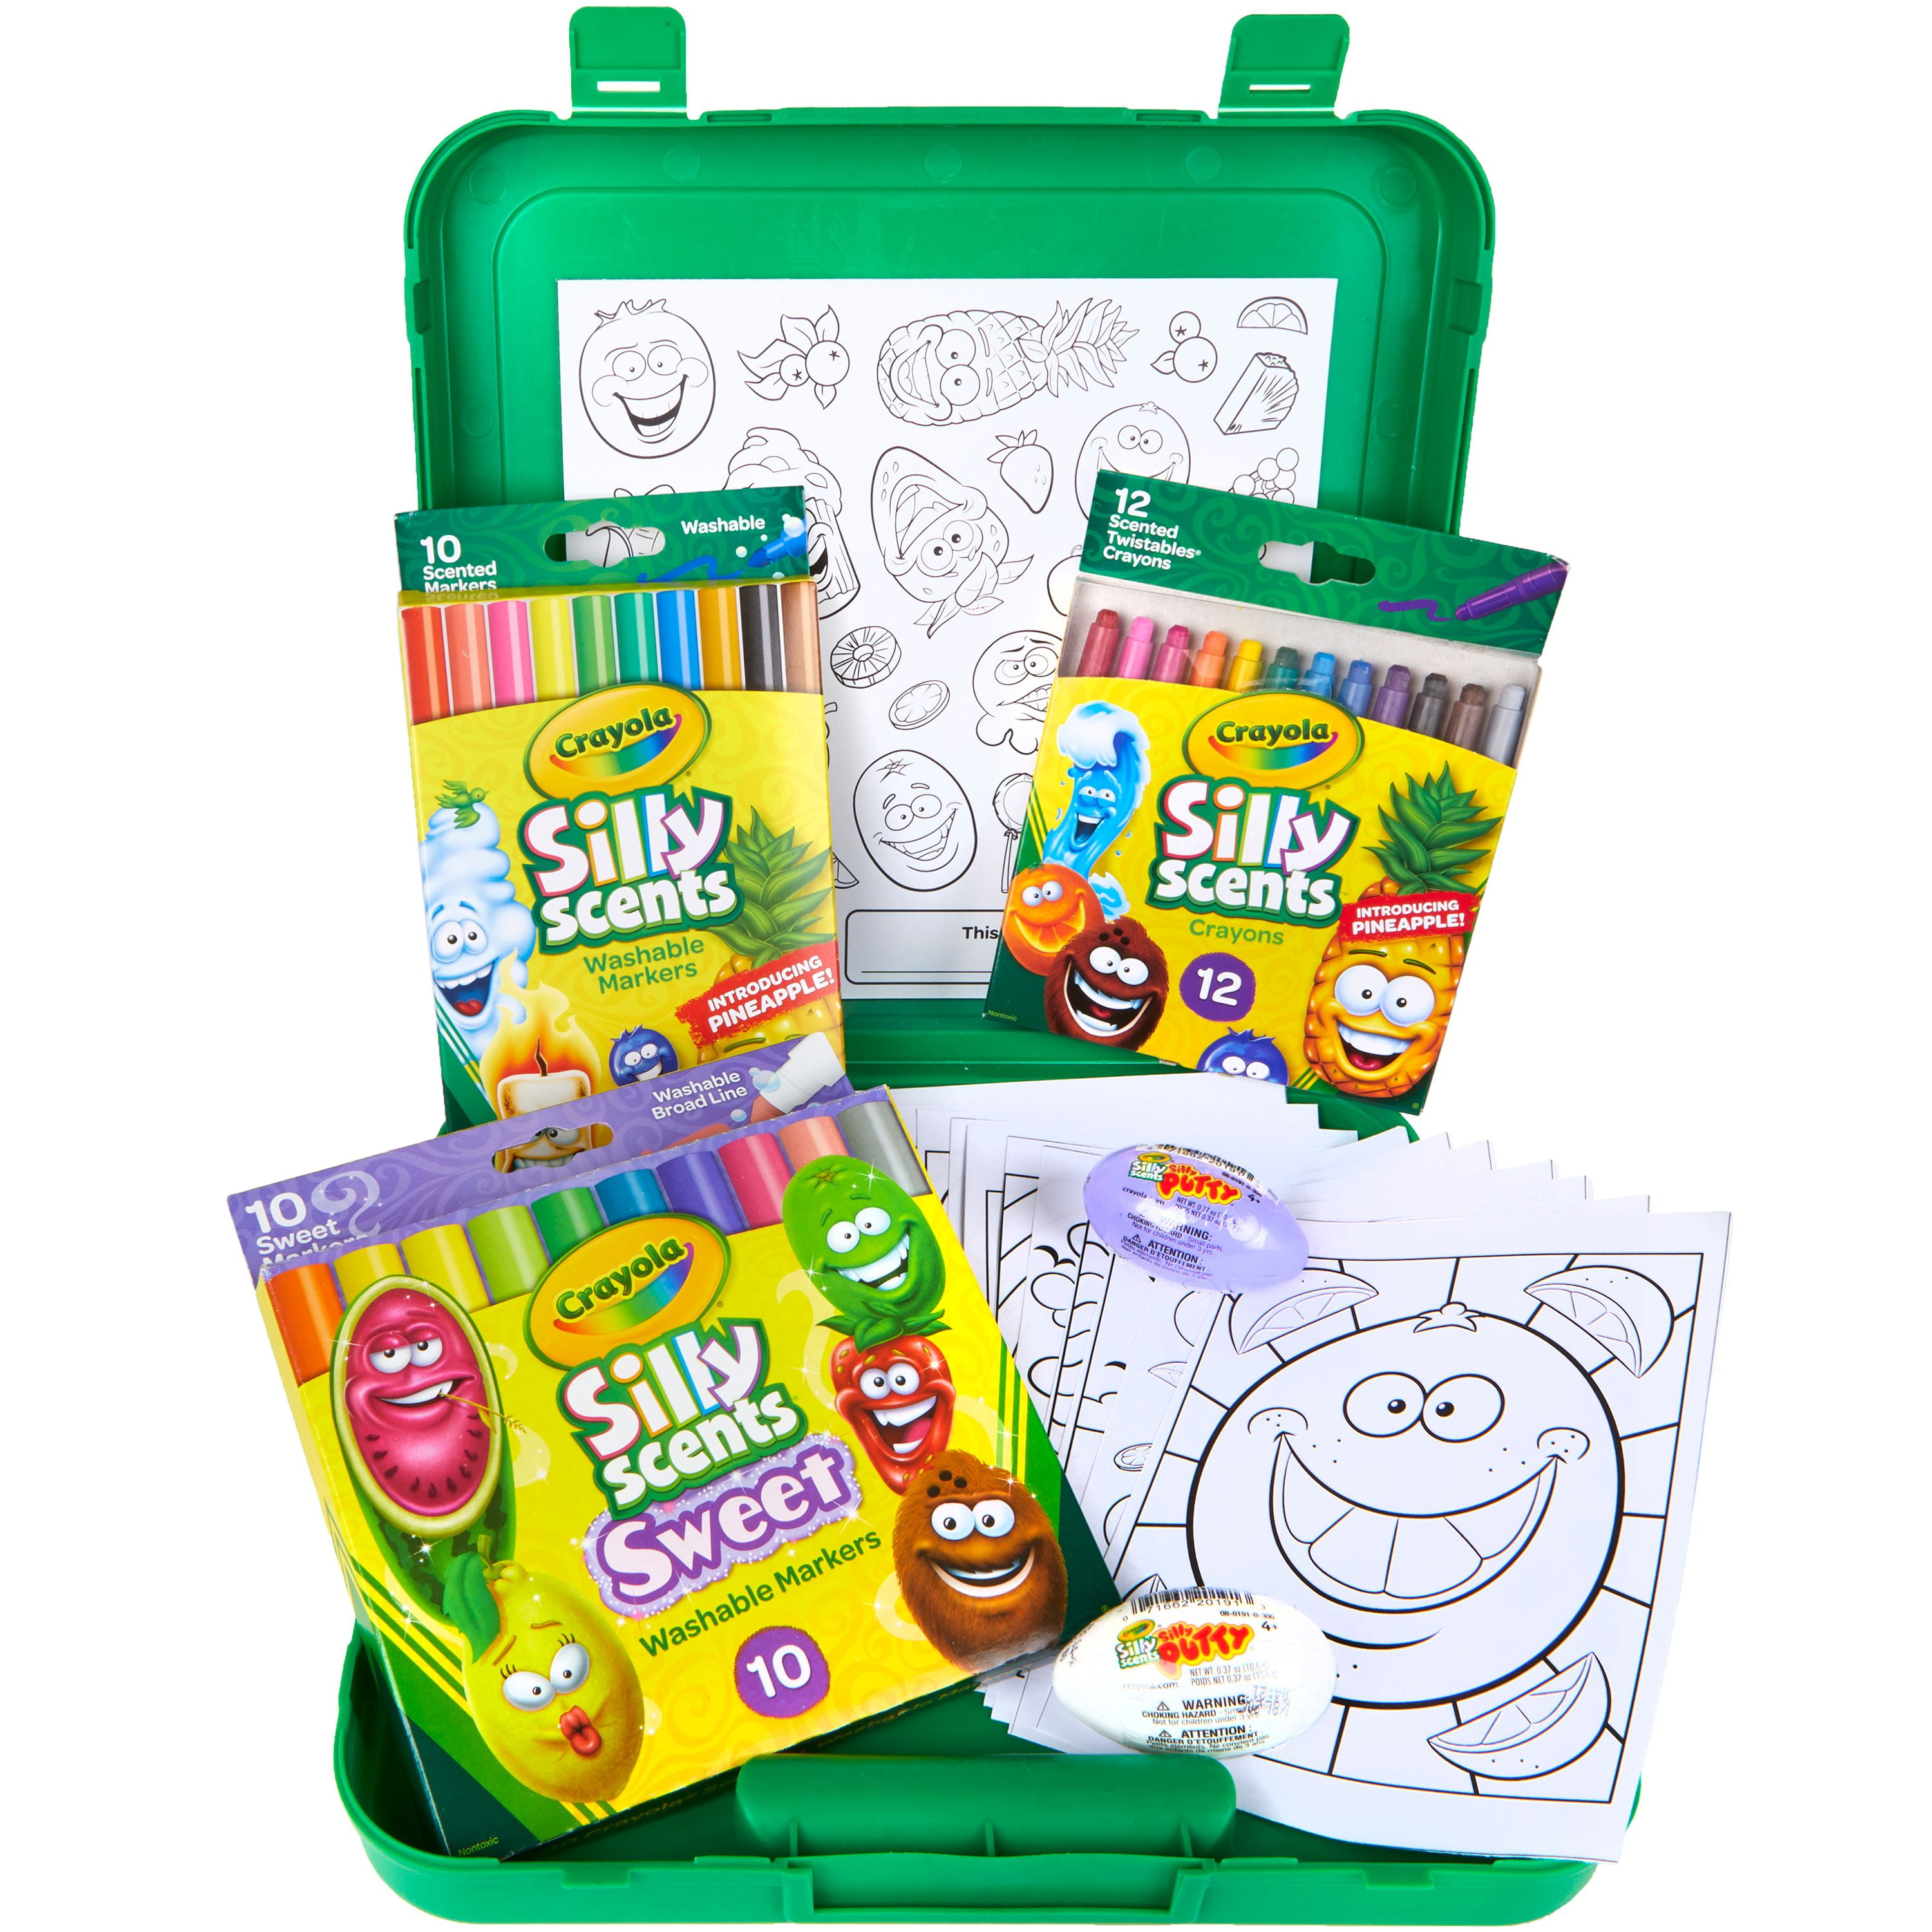 Sense of Smell Activity - with Crayola's New Silly Scents Markers